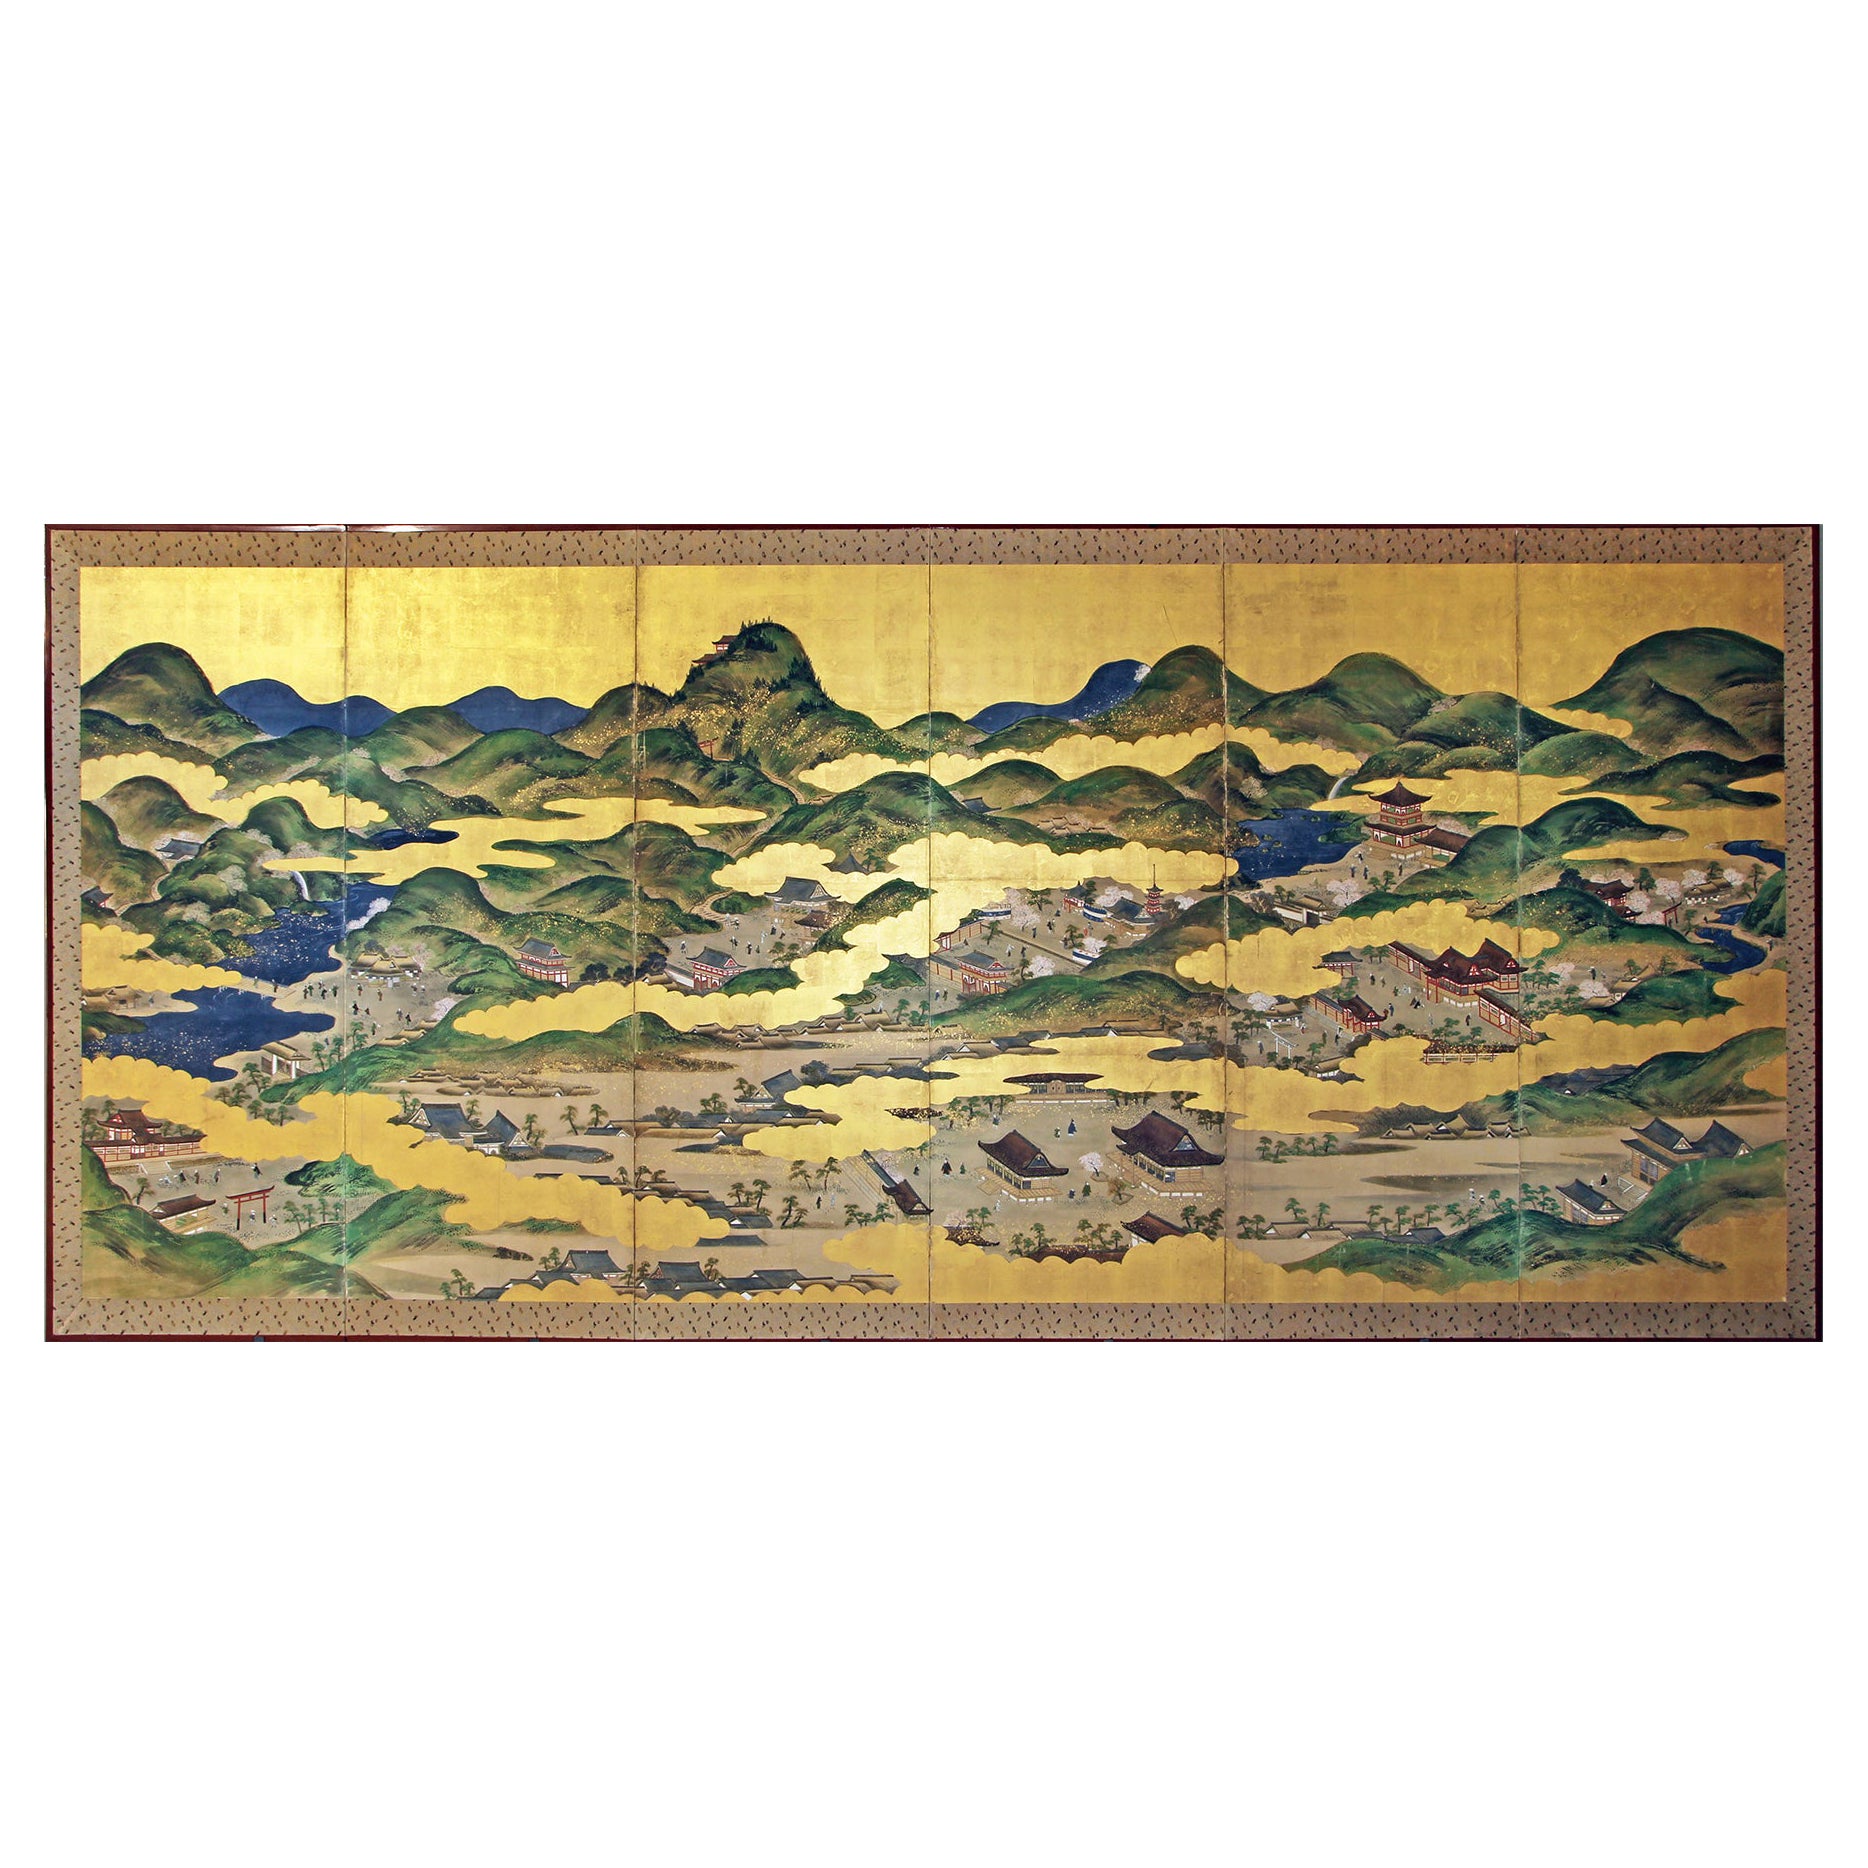 Tosa School, Japanese Folding Screen Kyoto Old Town Landscape